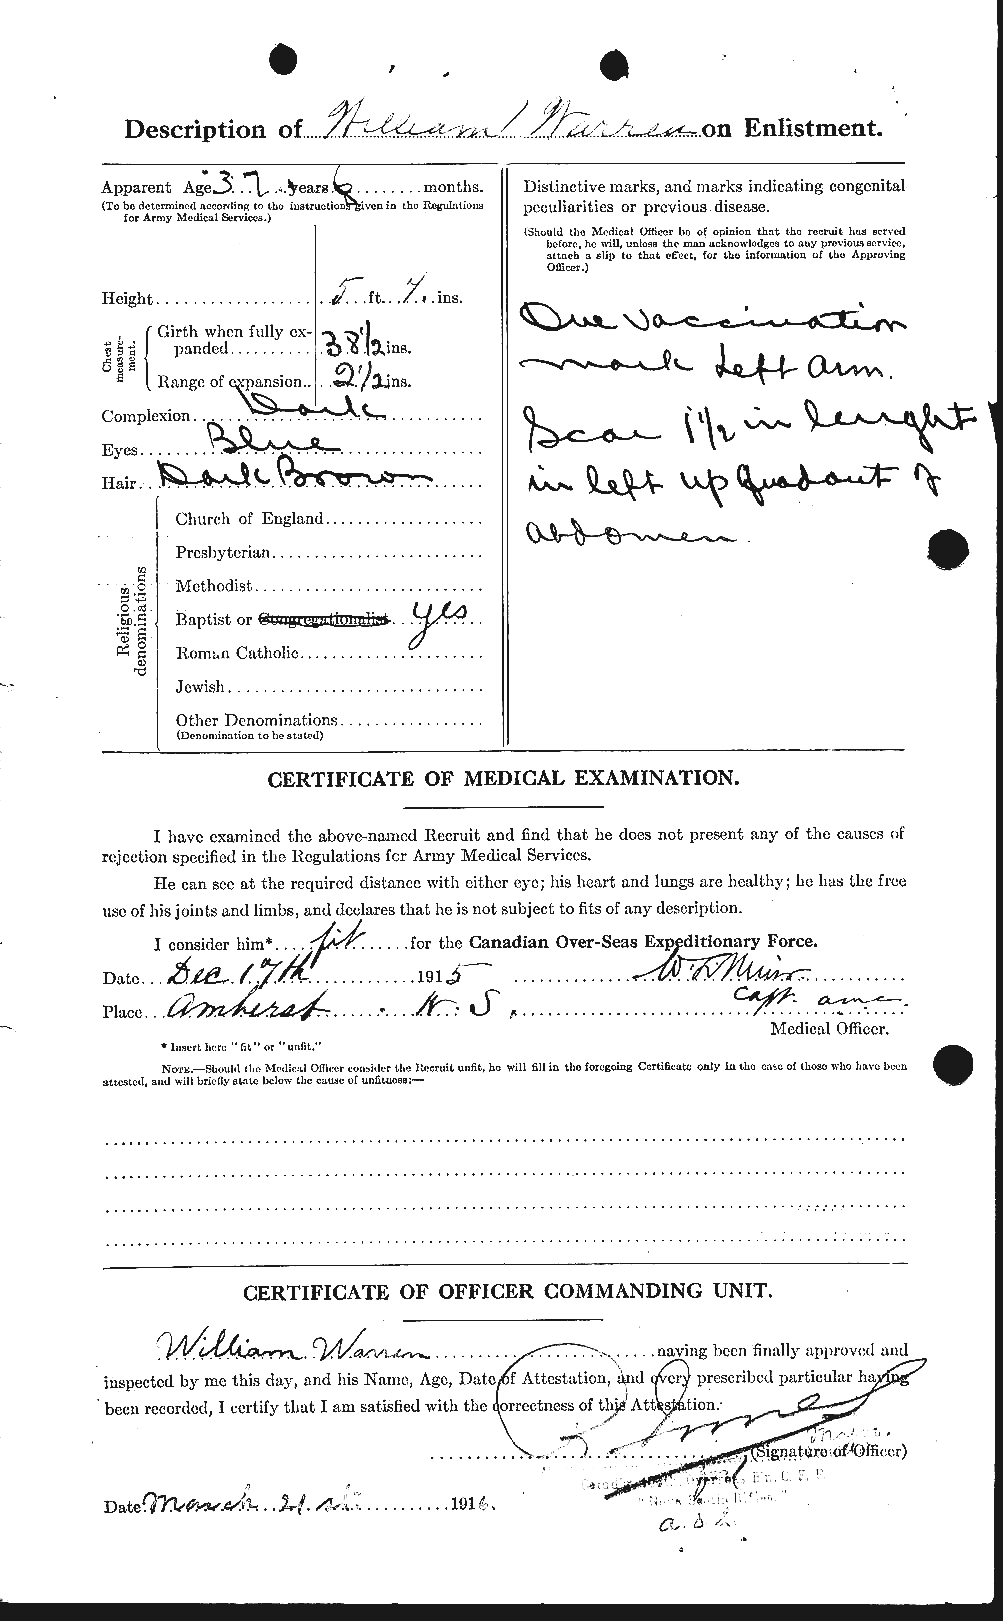 Personnel Records of the First World War - CEF 658677b